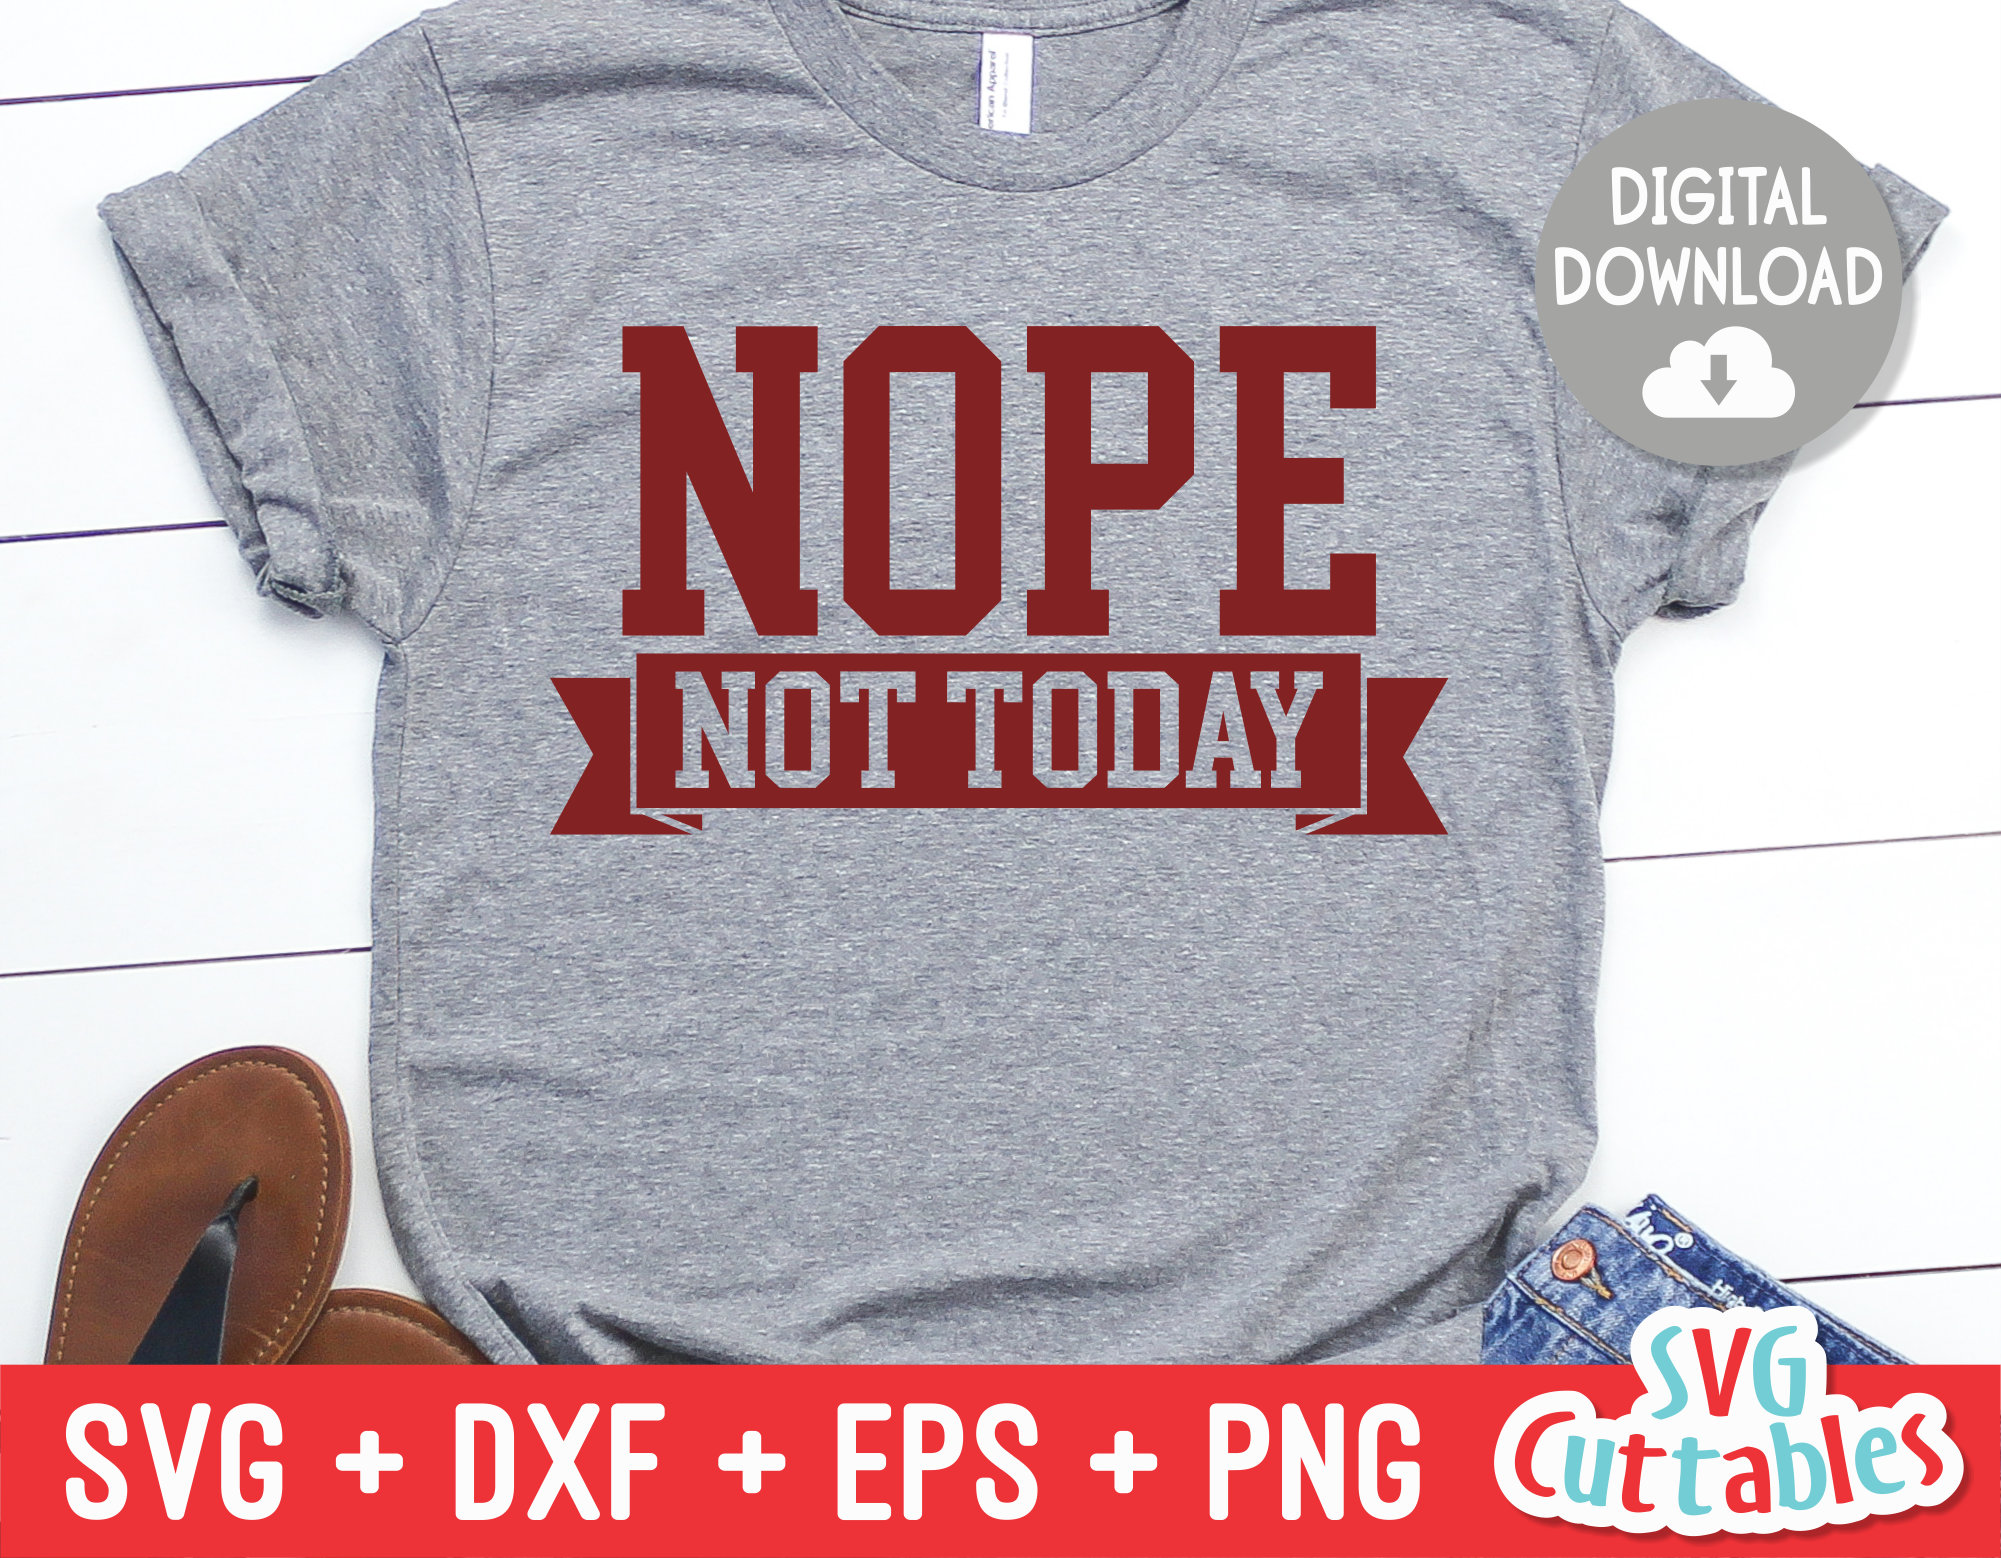 Today Shirt - Not Etsy Nope